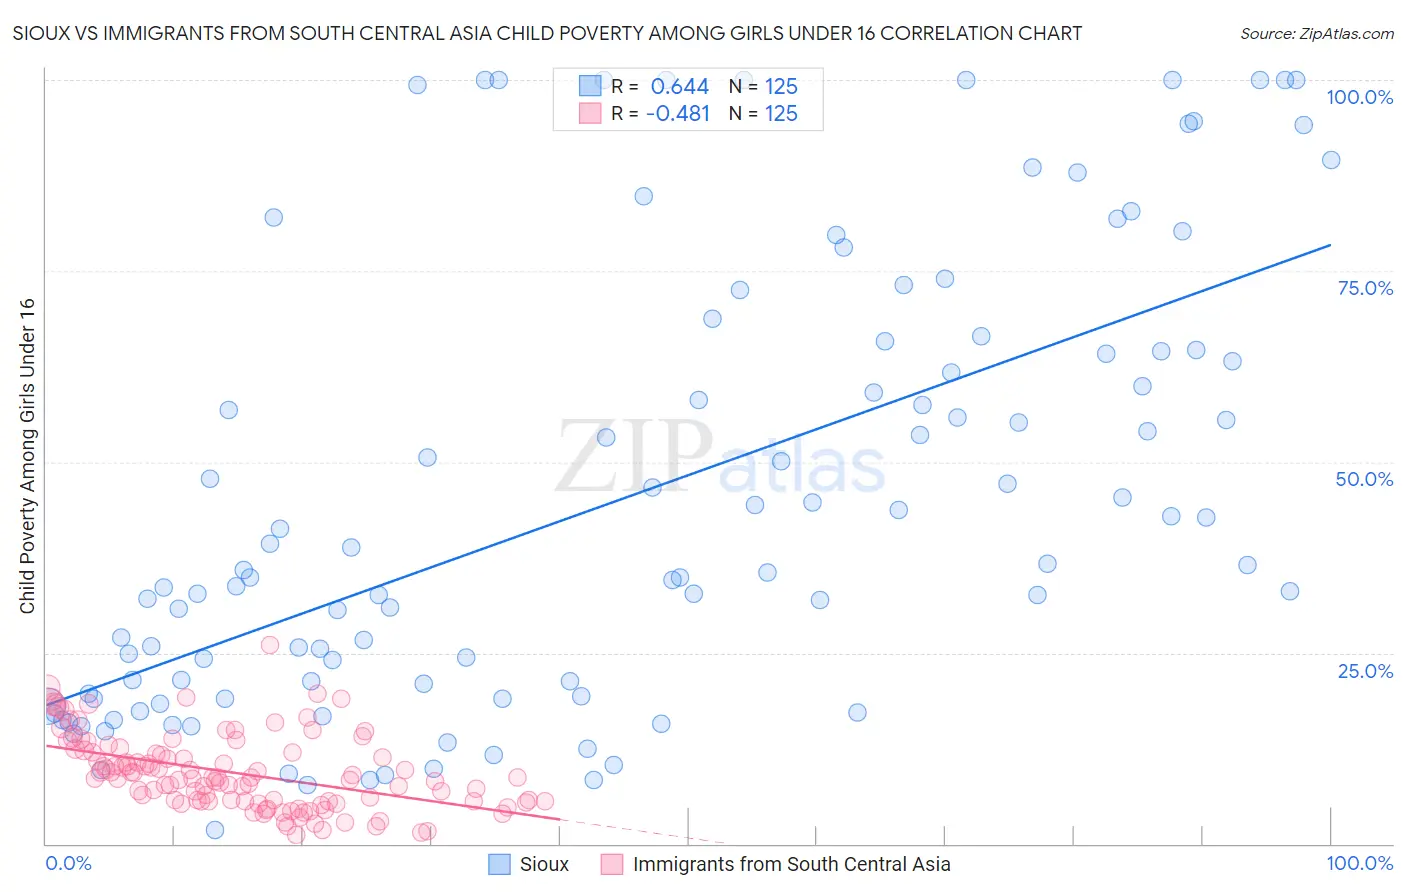 Sioux vs Immigrants from South Central Asia Child Poverty Among Girls Under 16